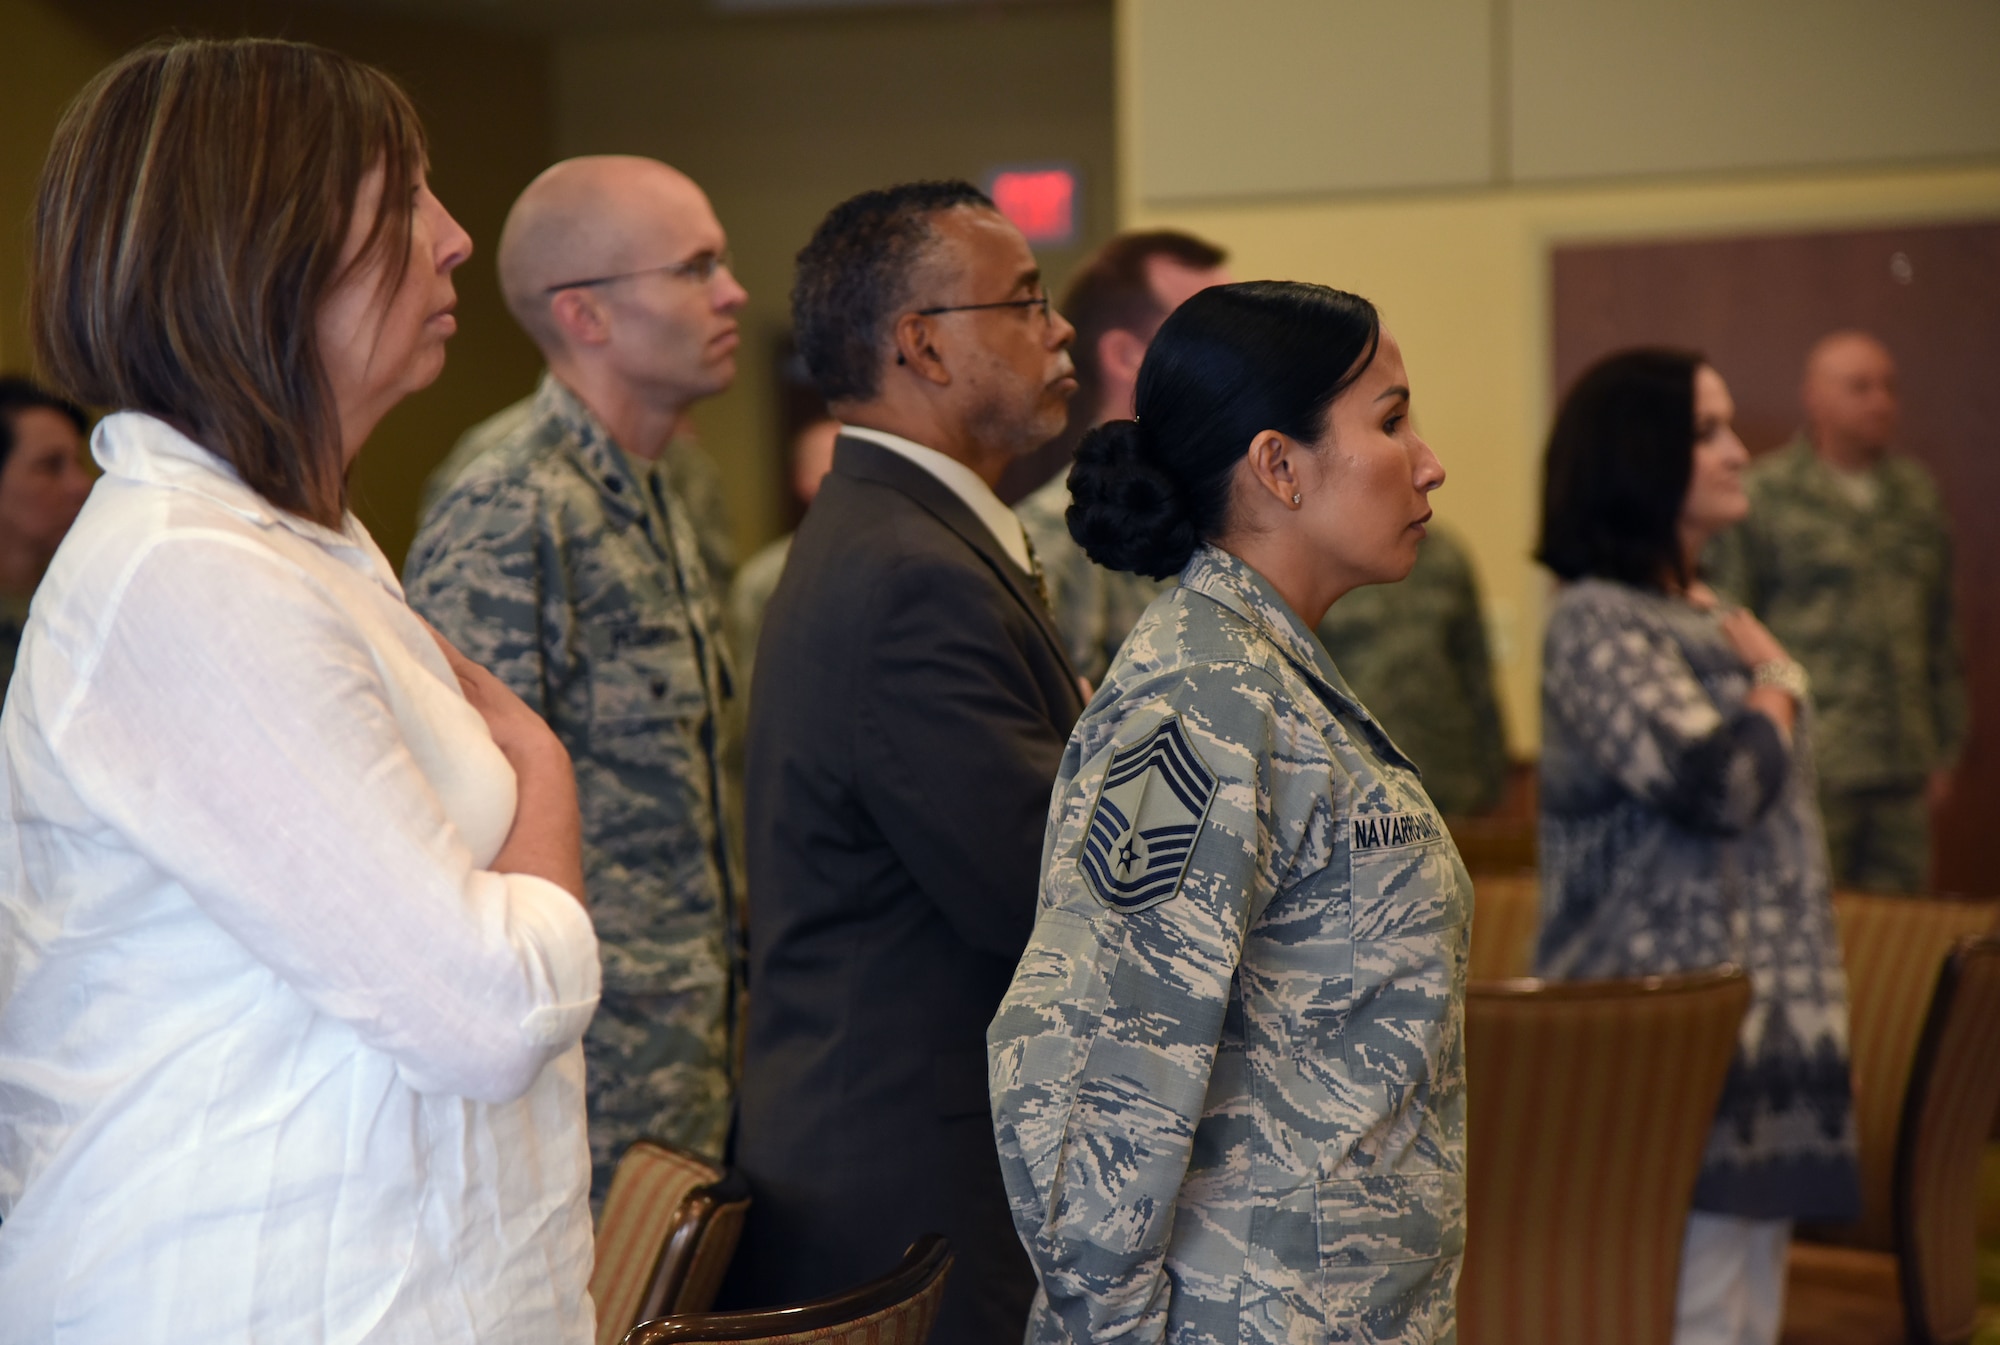 Keesler personnel stand during the singing of the national anthem during the Women’s History Month Luncheon at the Bay Breeze Event Center March 27, 2018, on Keesler Air Force Base, Mississippi. The theme for this year’s event is “Nevertheless She Persisted.” (U.S. Air Force photo by Kemberly Groue)